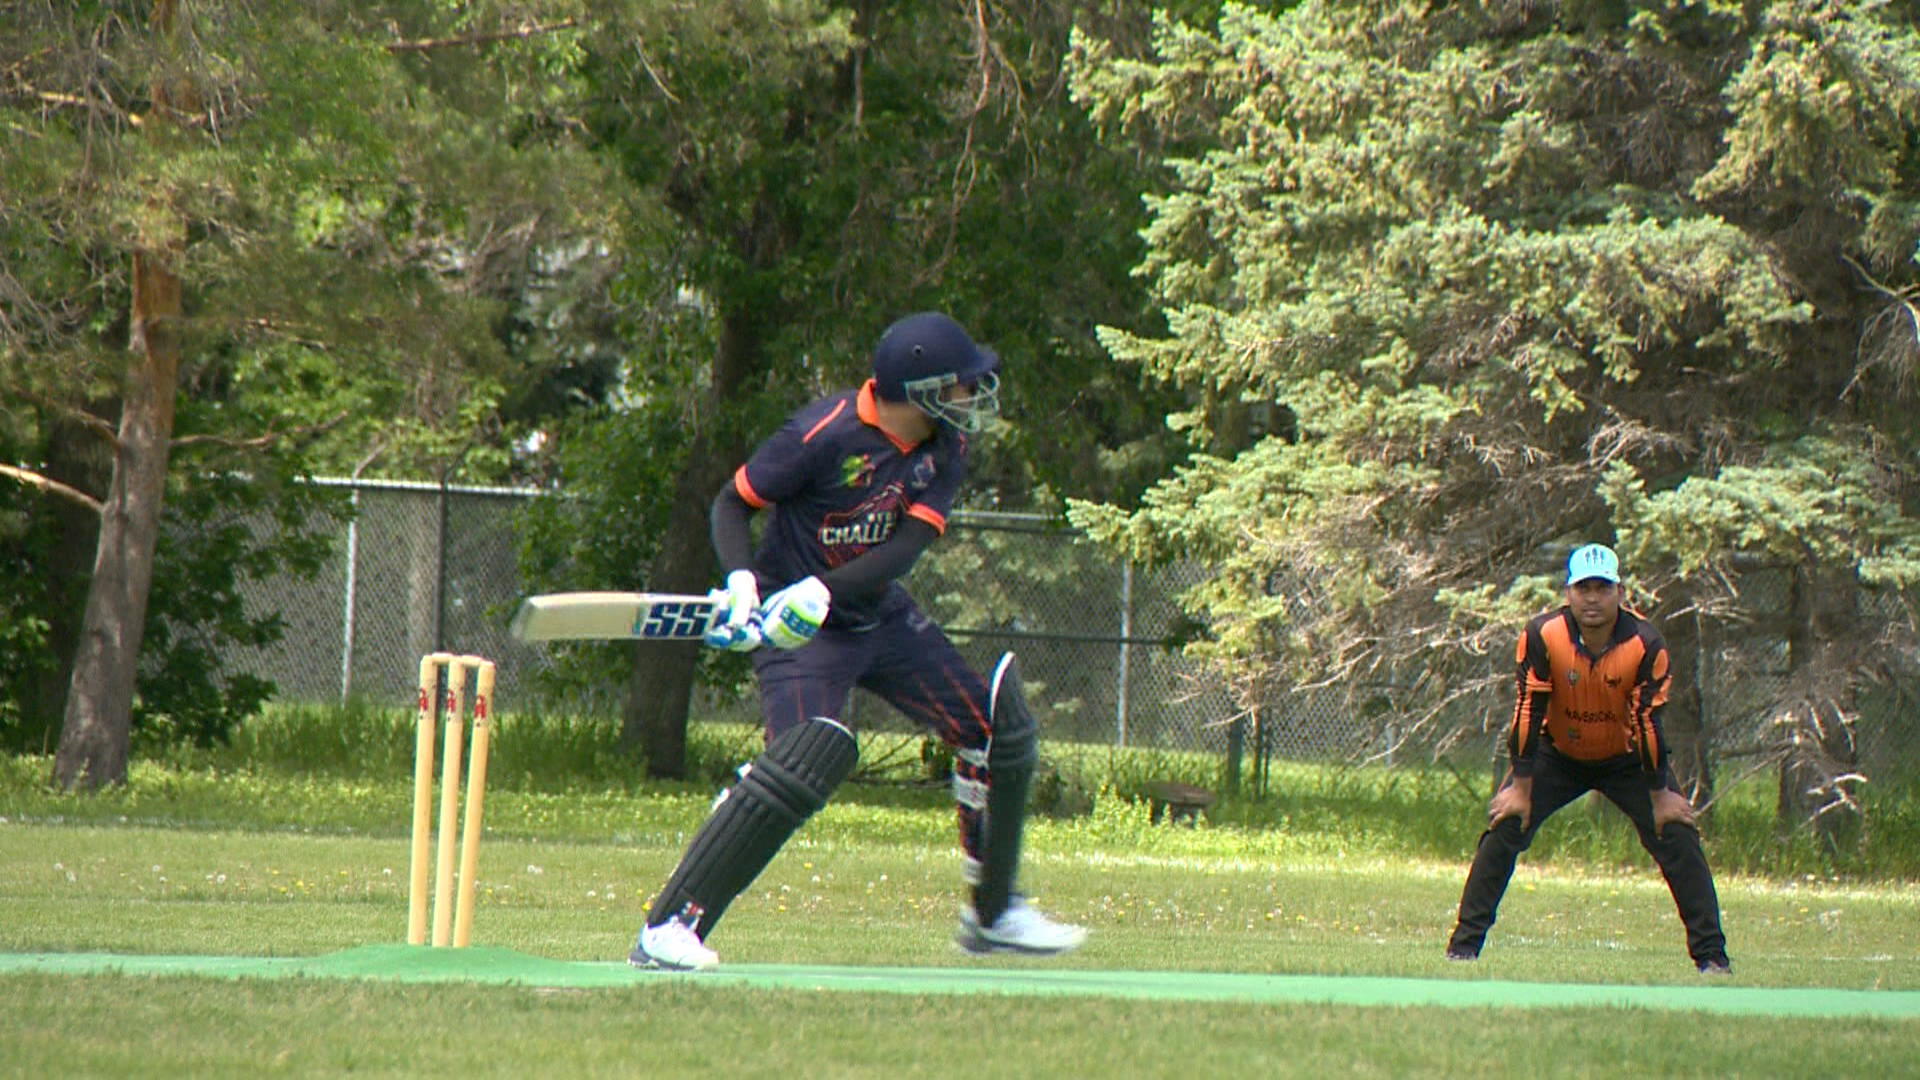 Cricket field expansion coming to Regina as the sport grows in Saskatchewan